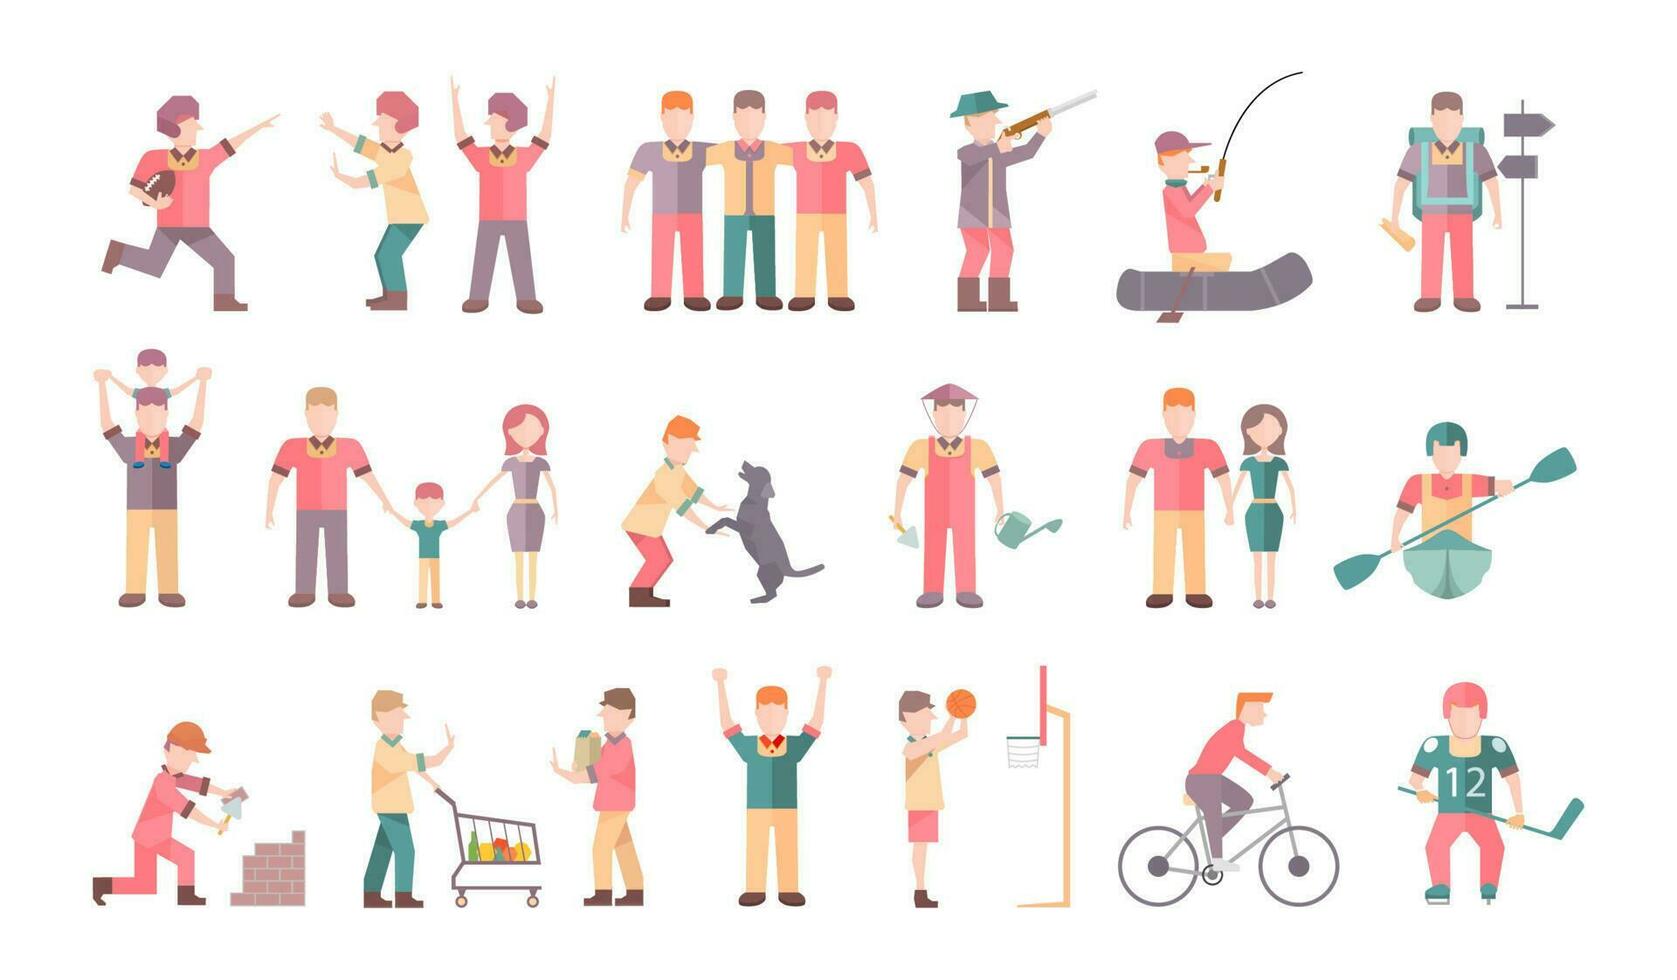 People in different situations and poses. Friends, family, couple, hobby, sport. Flat icons. Vector illustration.